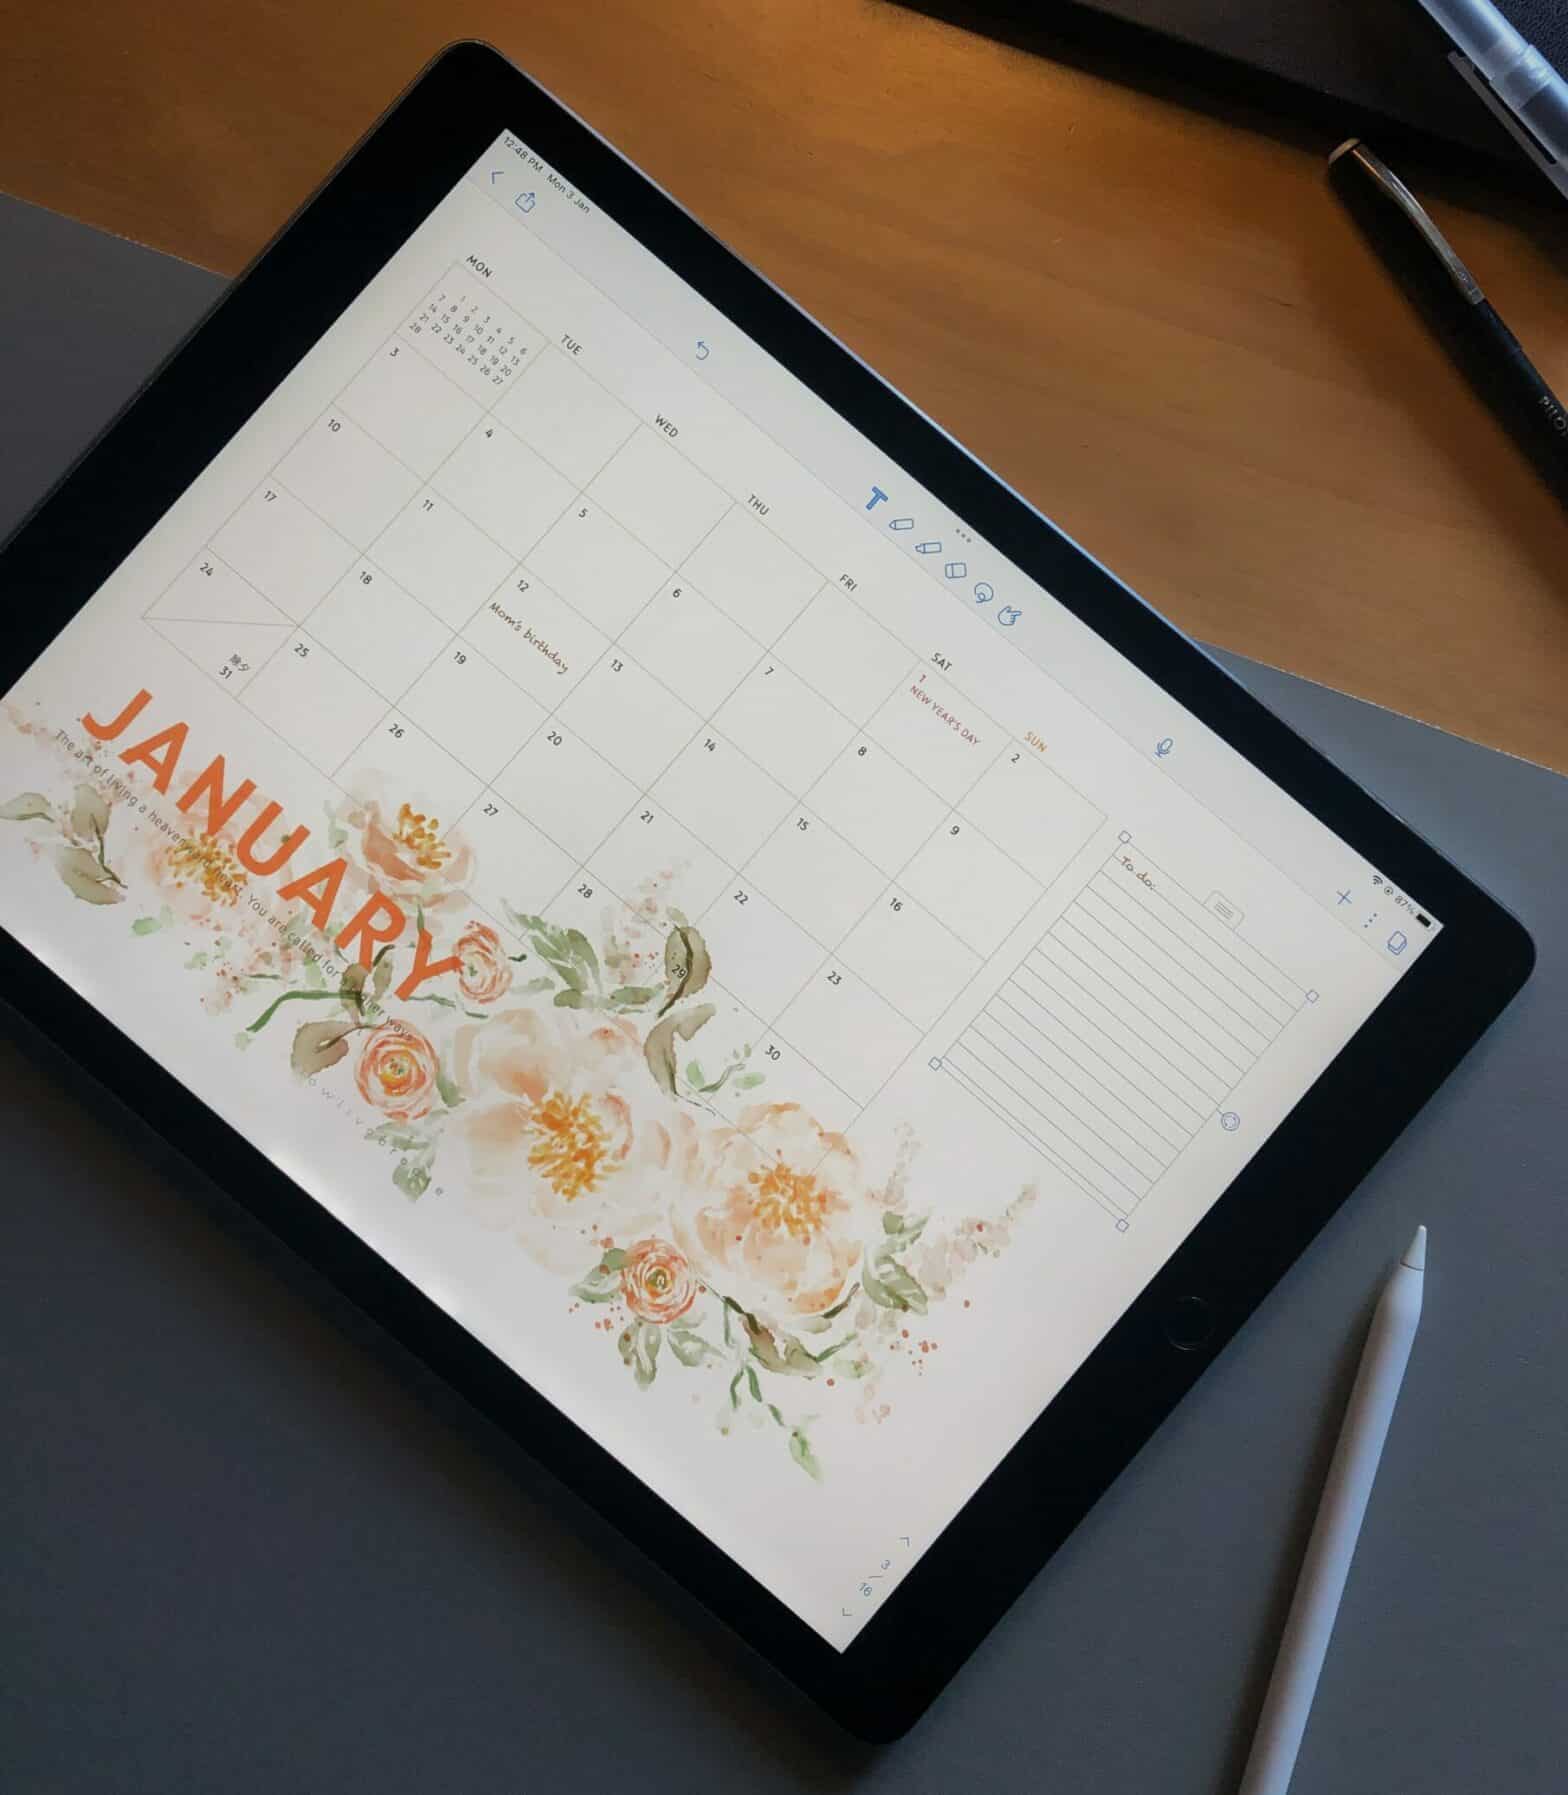 Image showing a planner on an ipad.